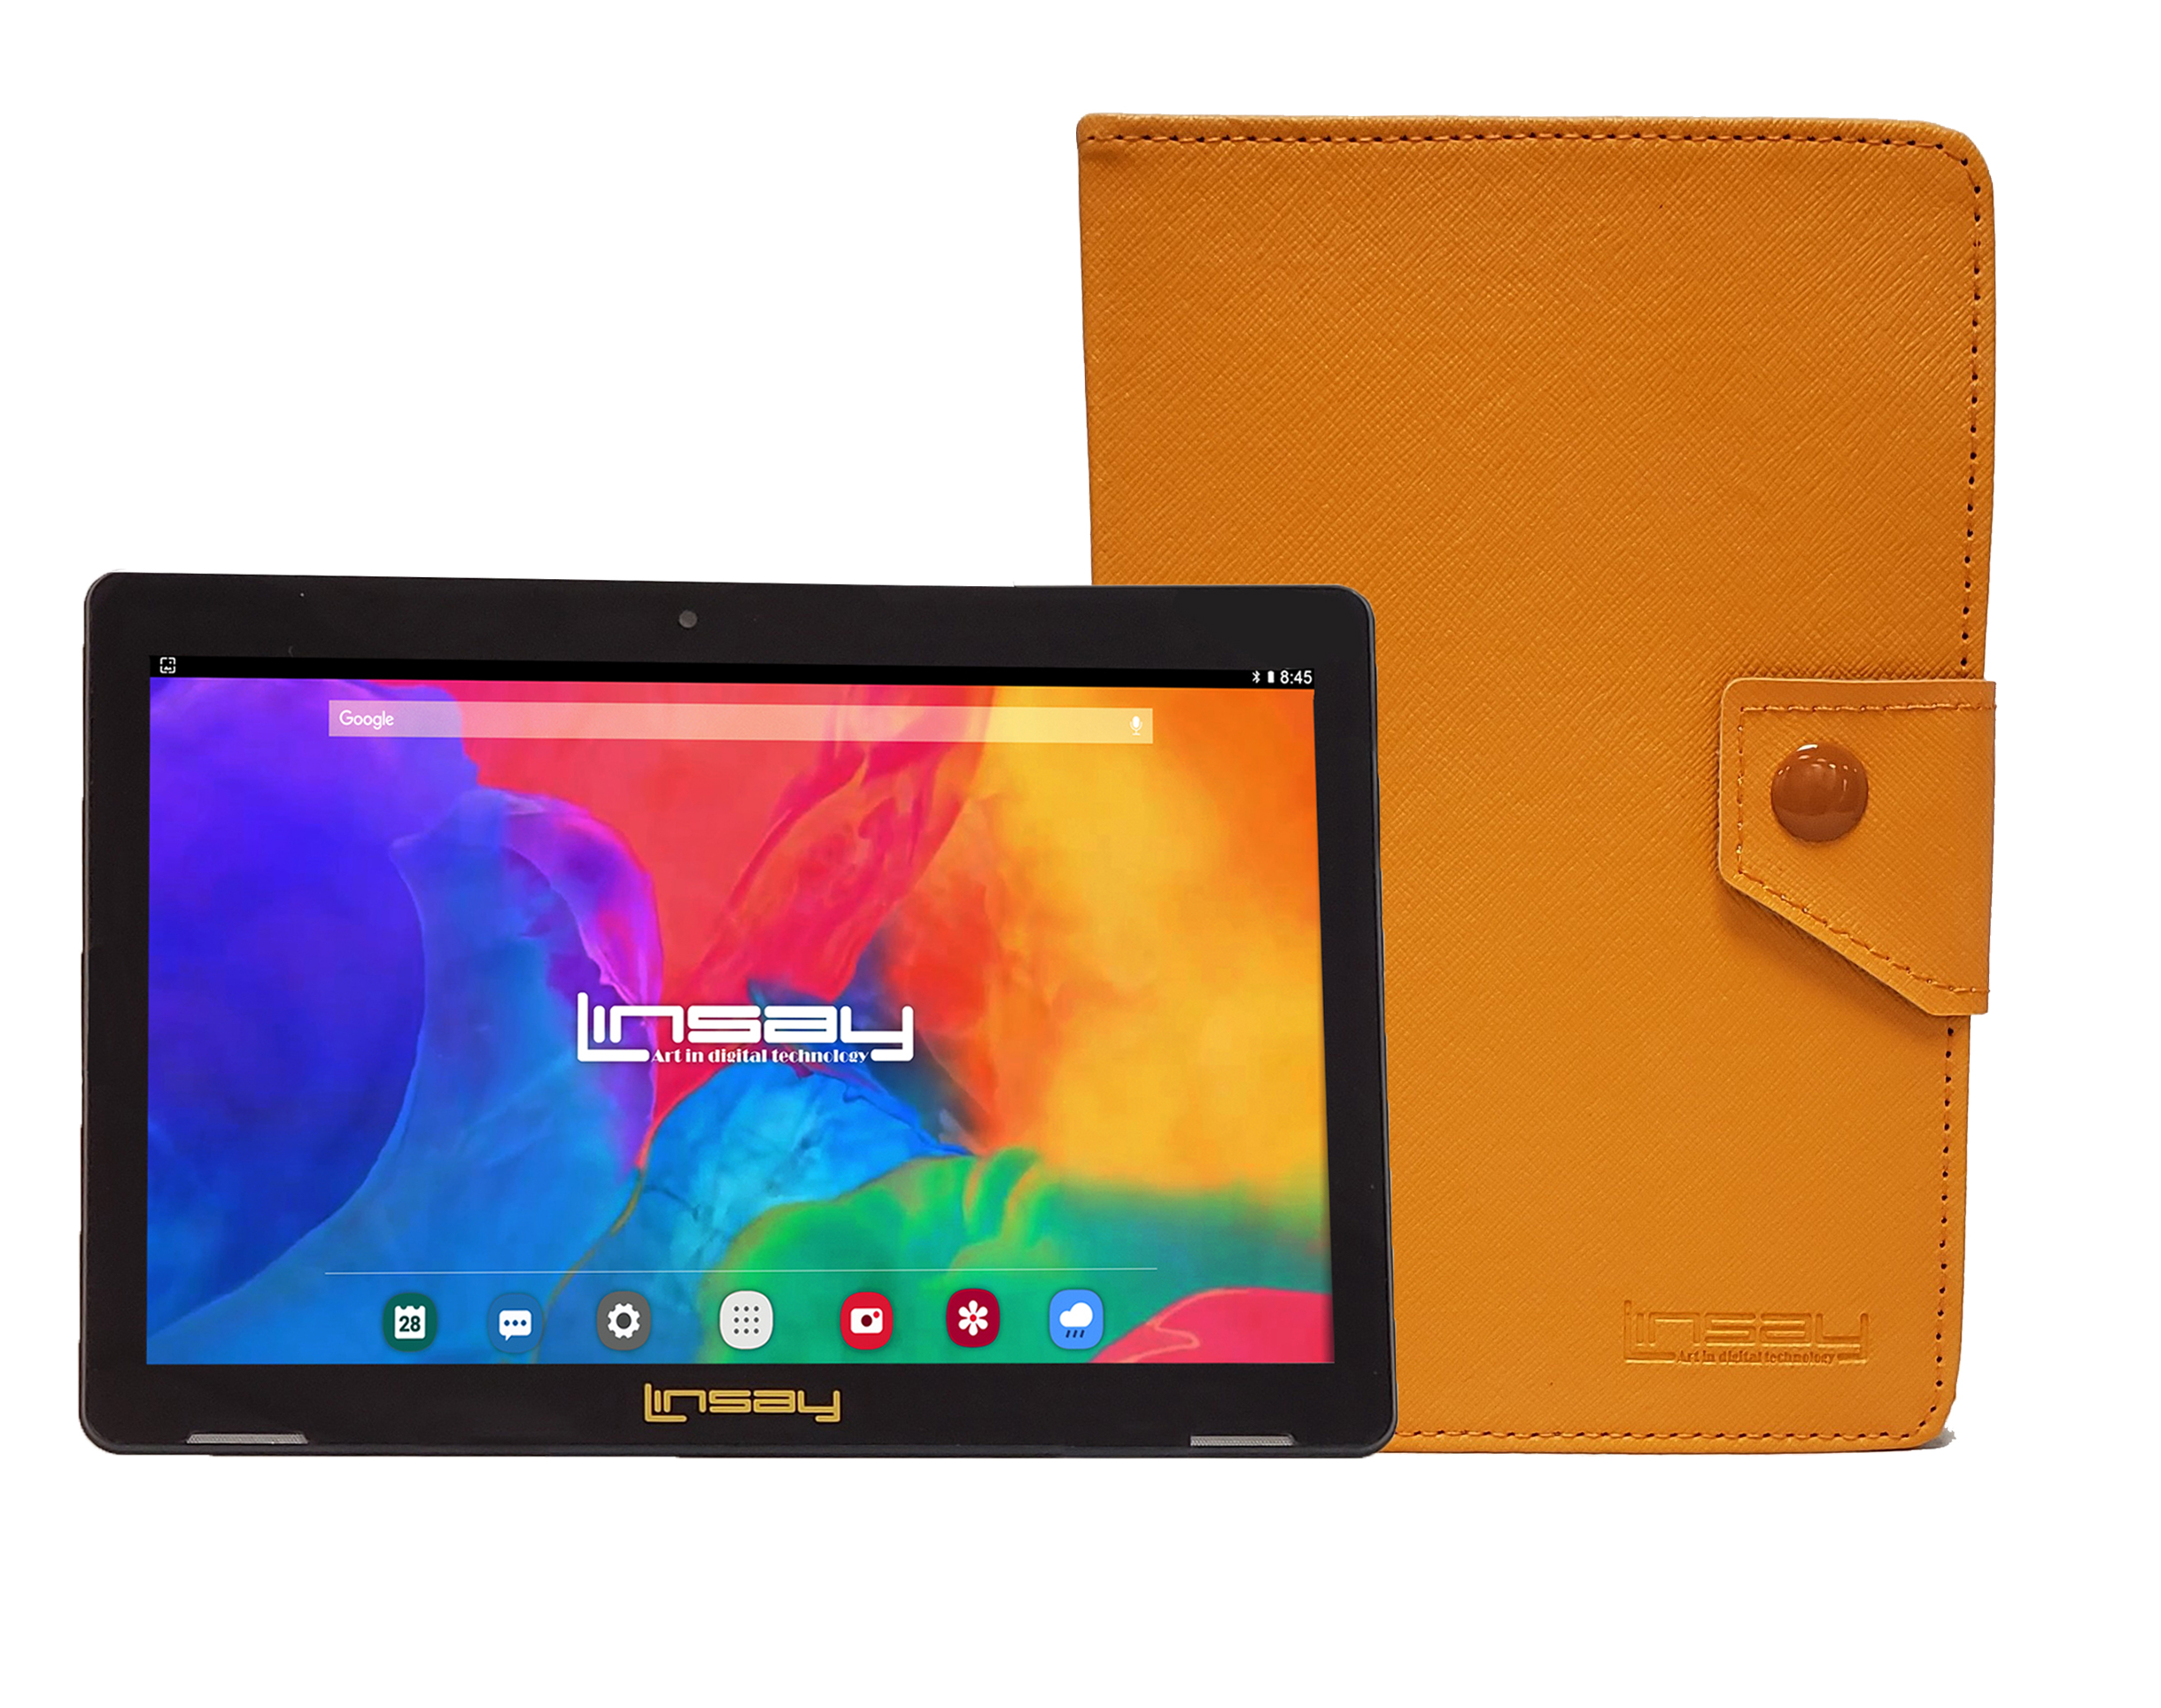 LINSAY 10.1" IPS 2GB RAM 64GB Storage Android 13 Tablet with Protective case Orange color, Google Certified - image 1 of 3